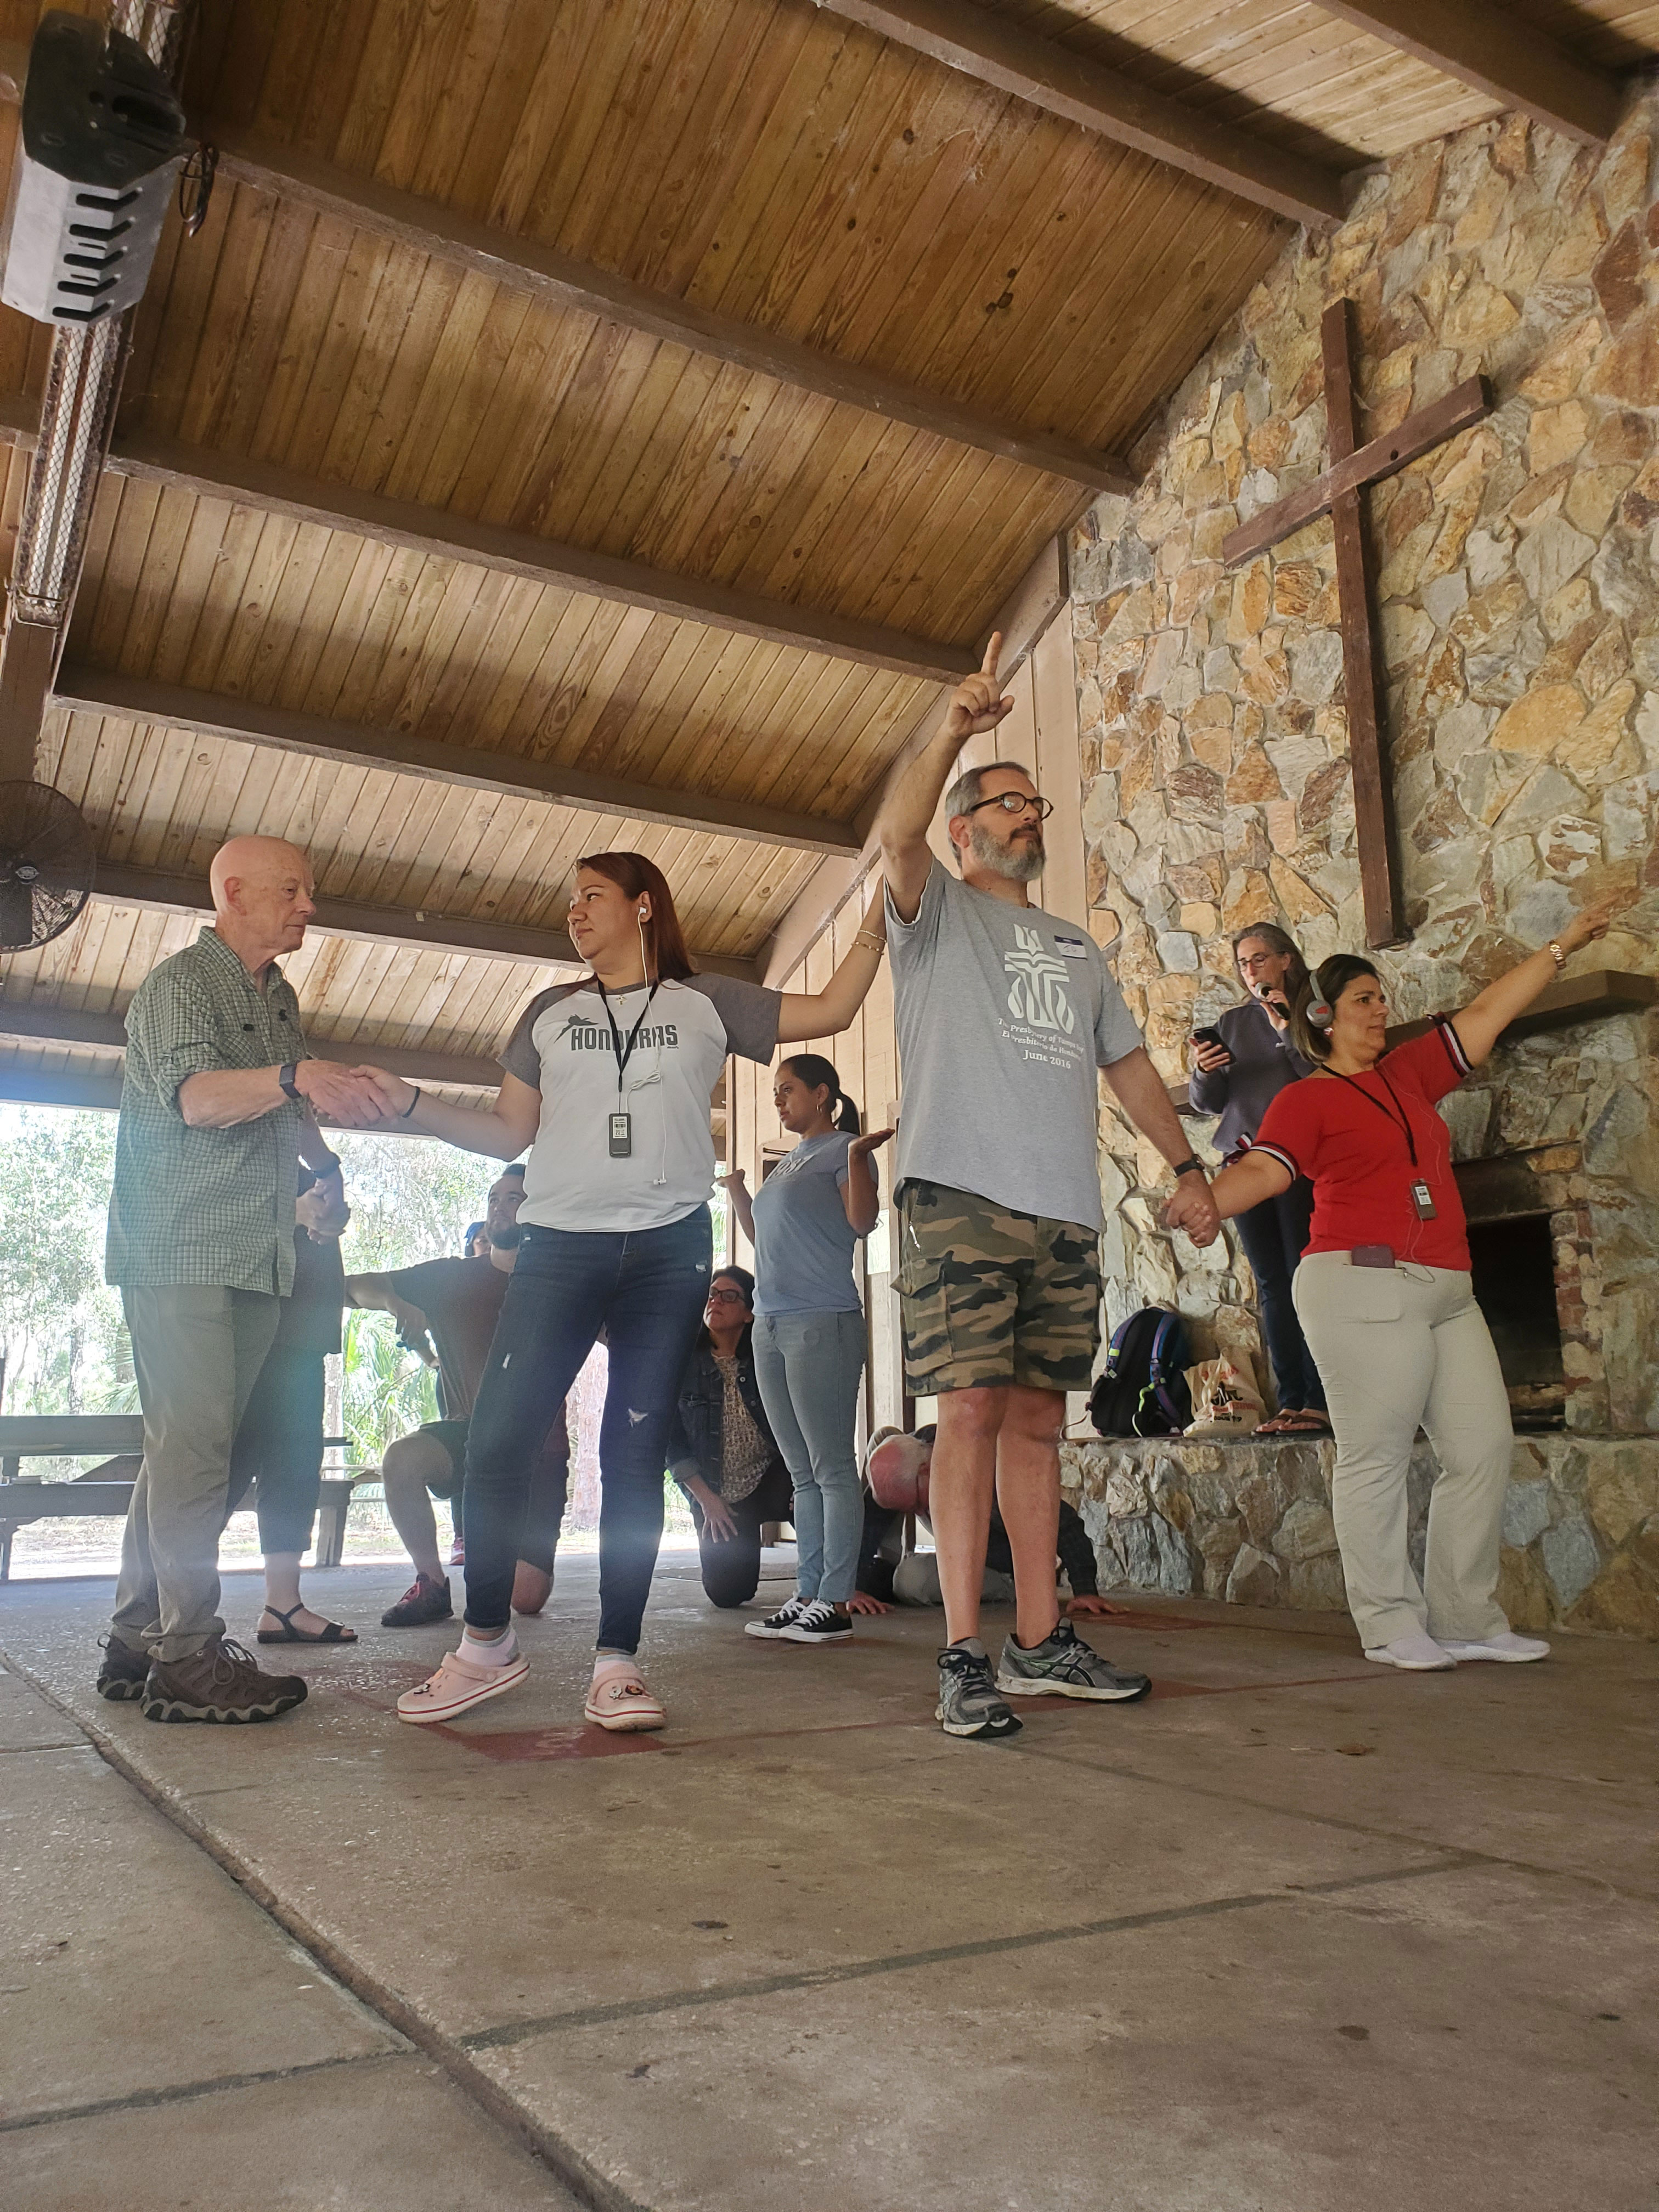 Participants of the Honduras Mission Network mission festival were asked to reflect on and represent as “statues” three themes: Abundance, friendship with dignity, and mutual transformation. Photo by Dori Hjalmarson.